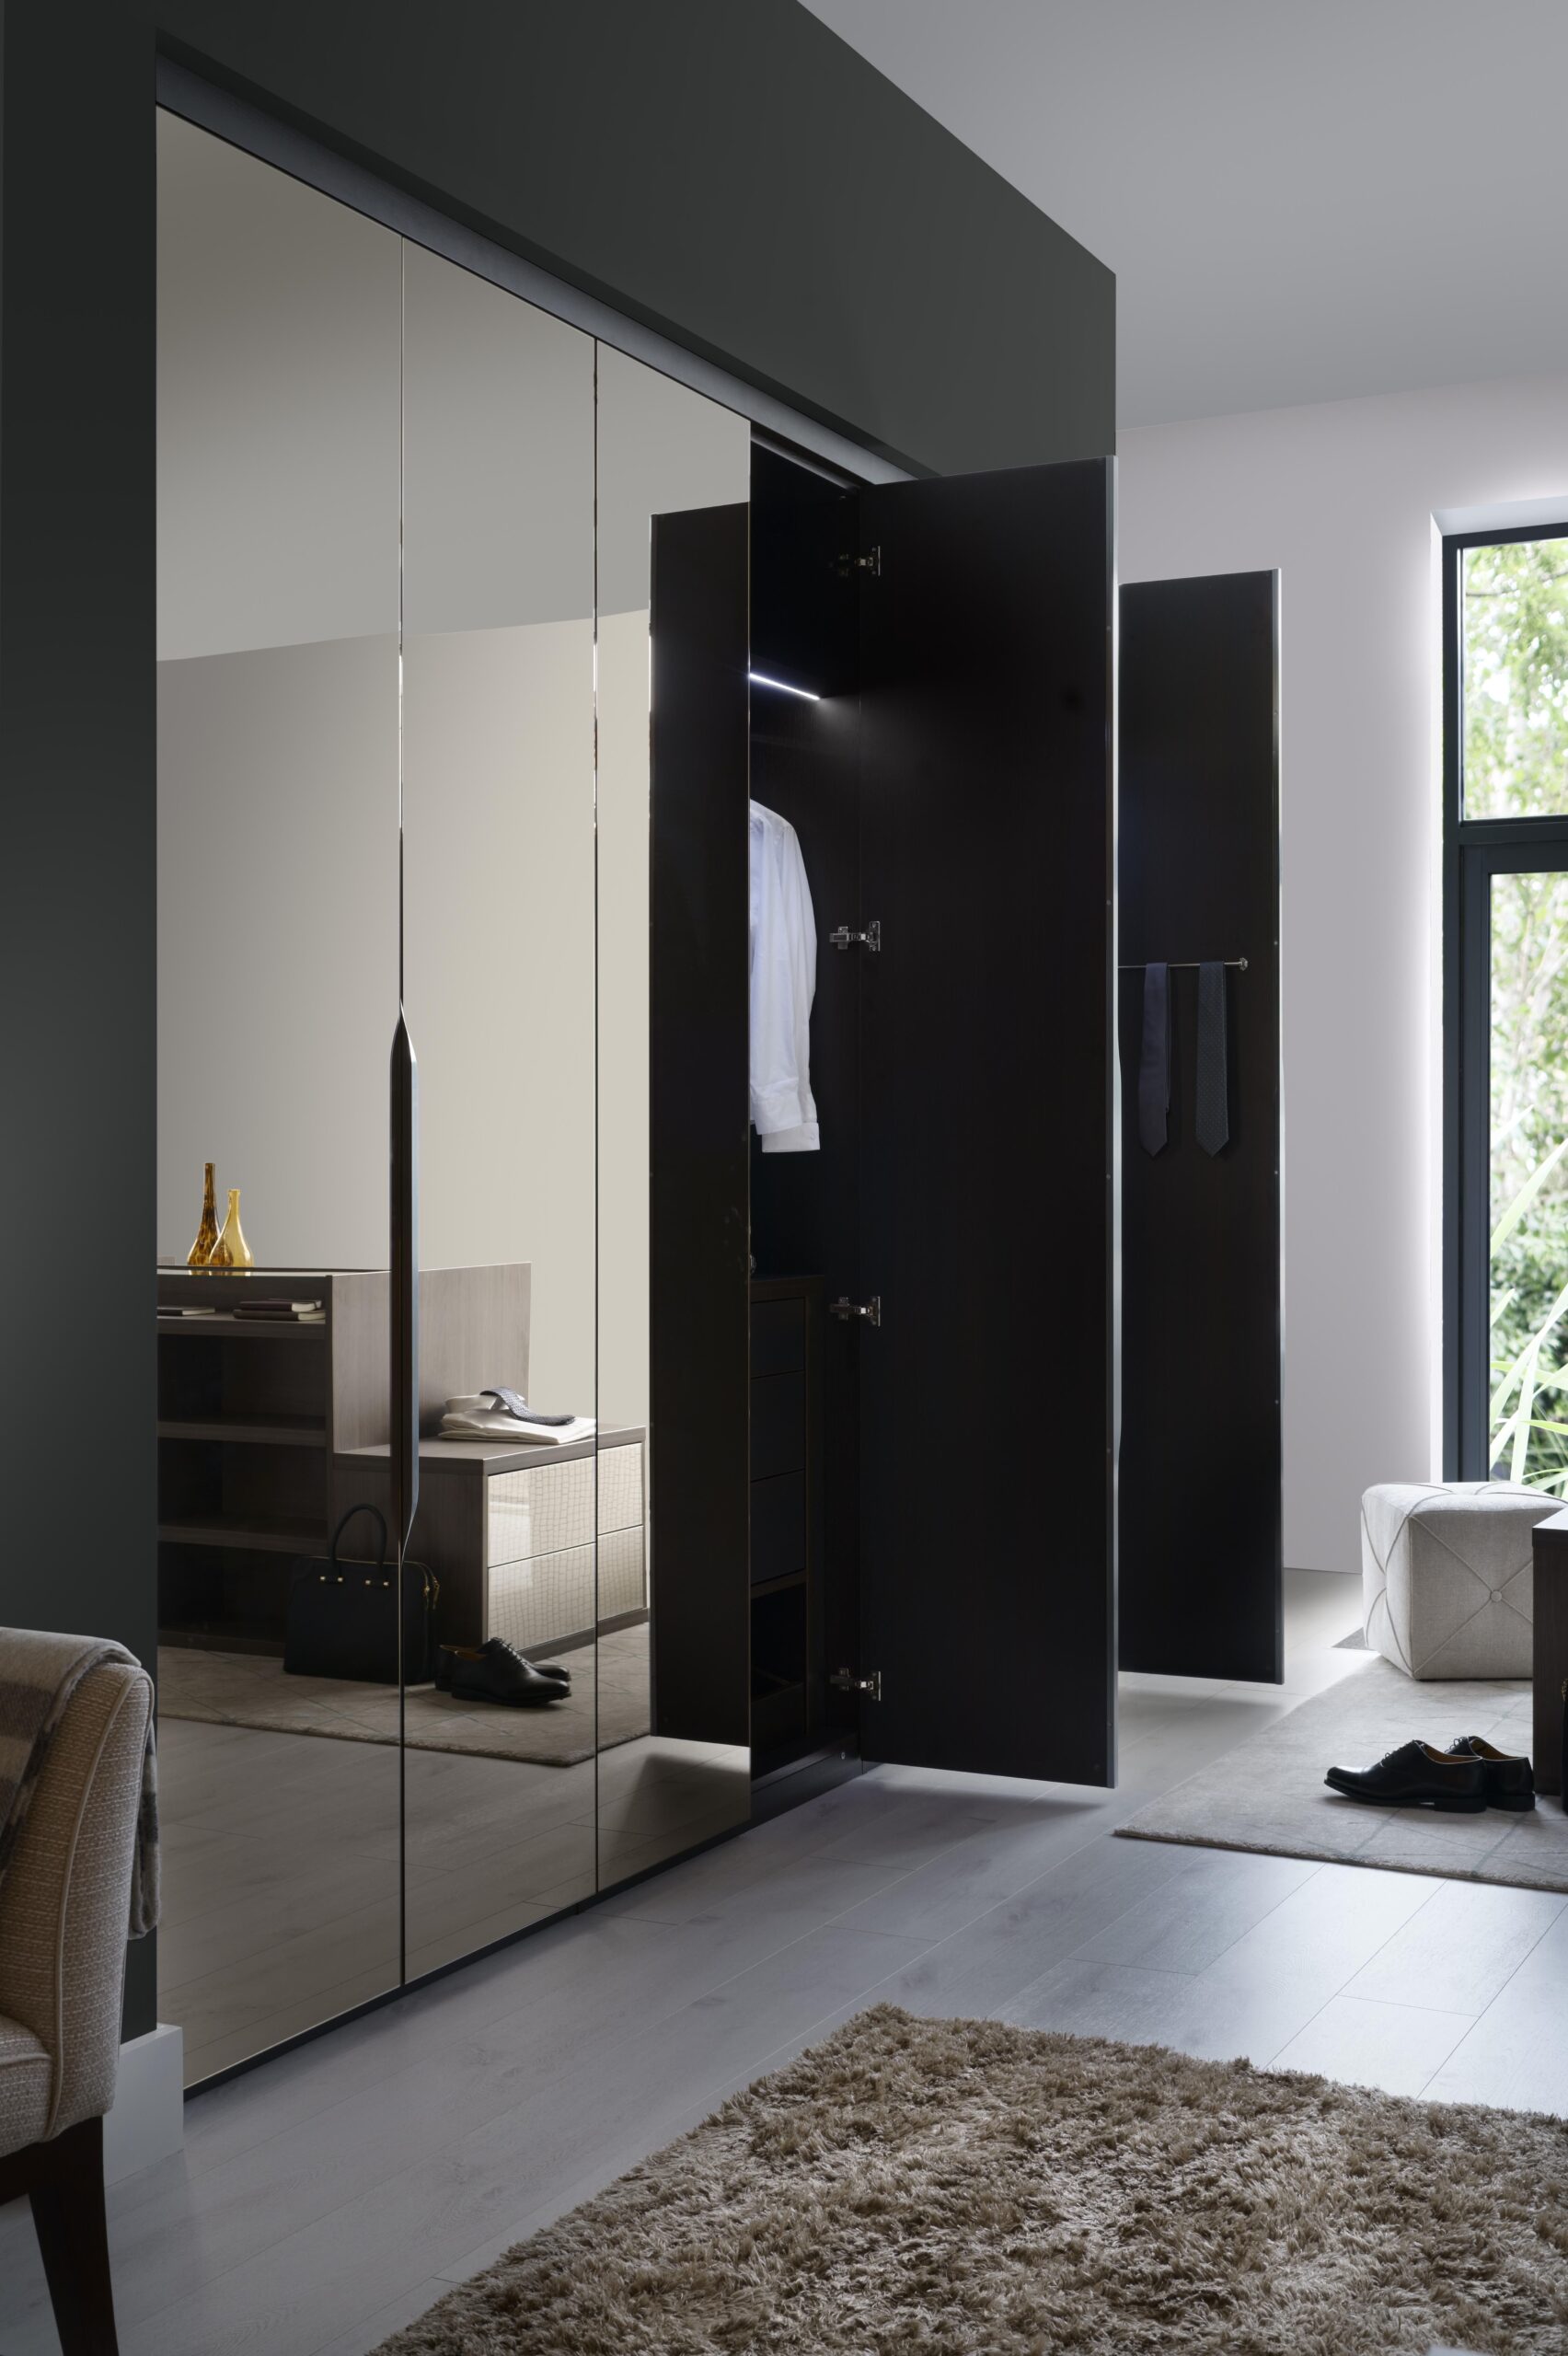 Get traditional look in your bedroom with
mirror wardrobe